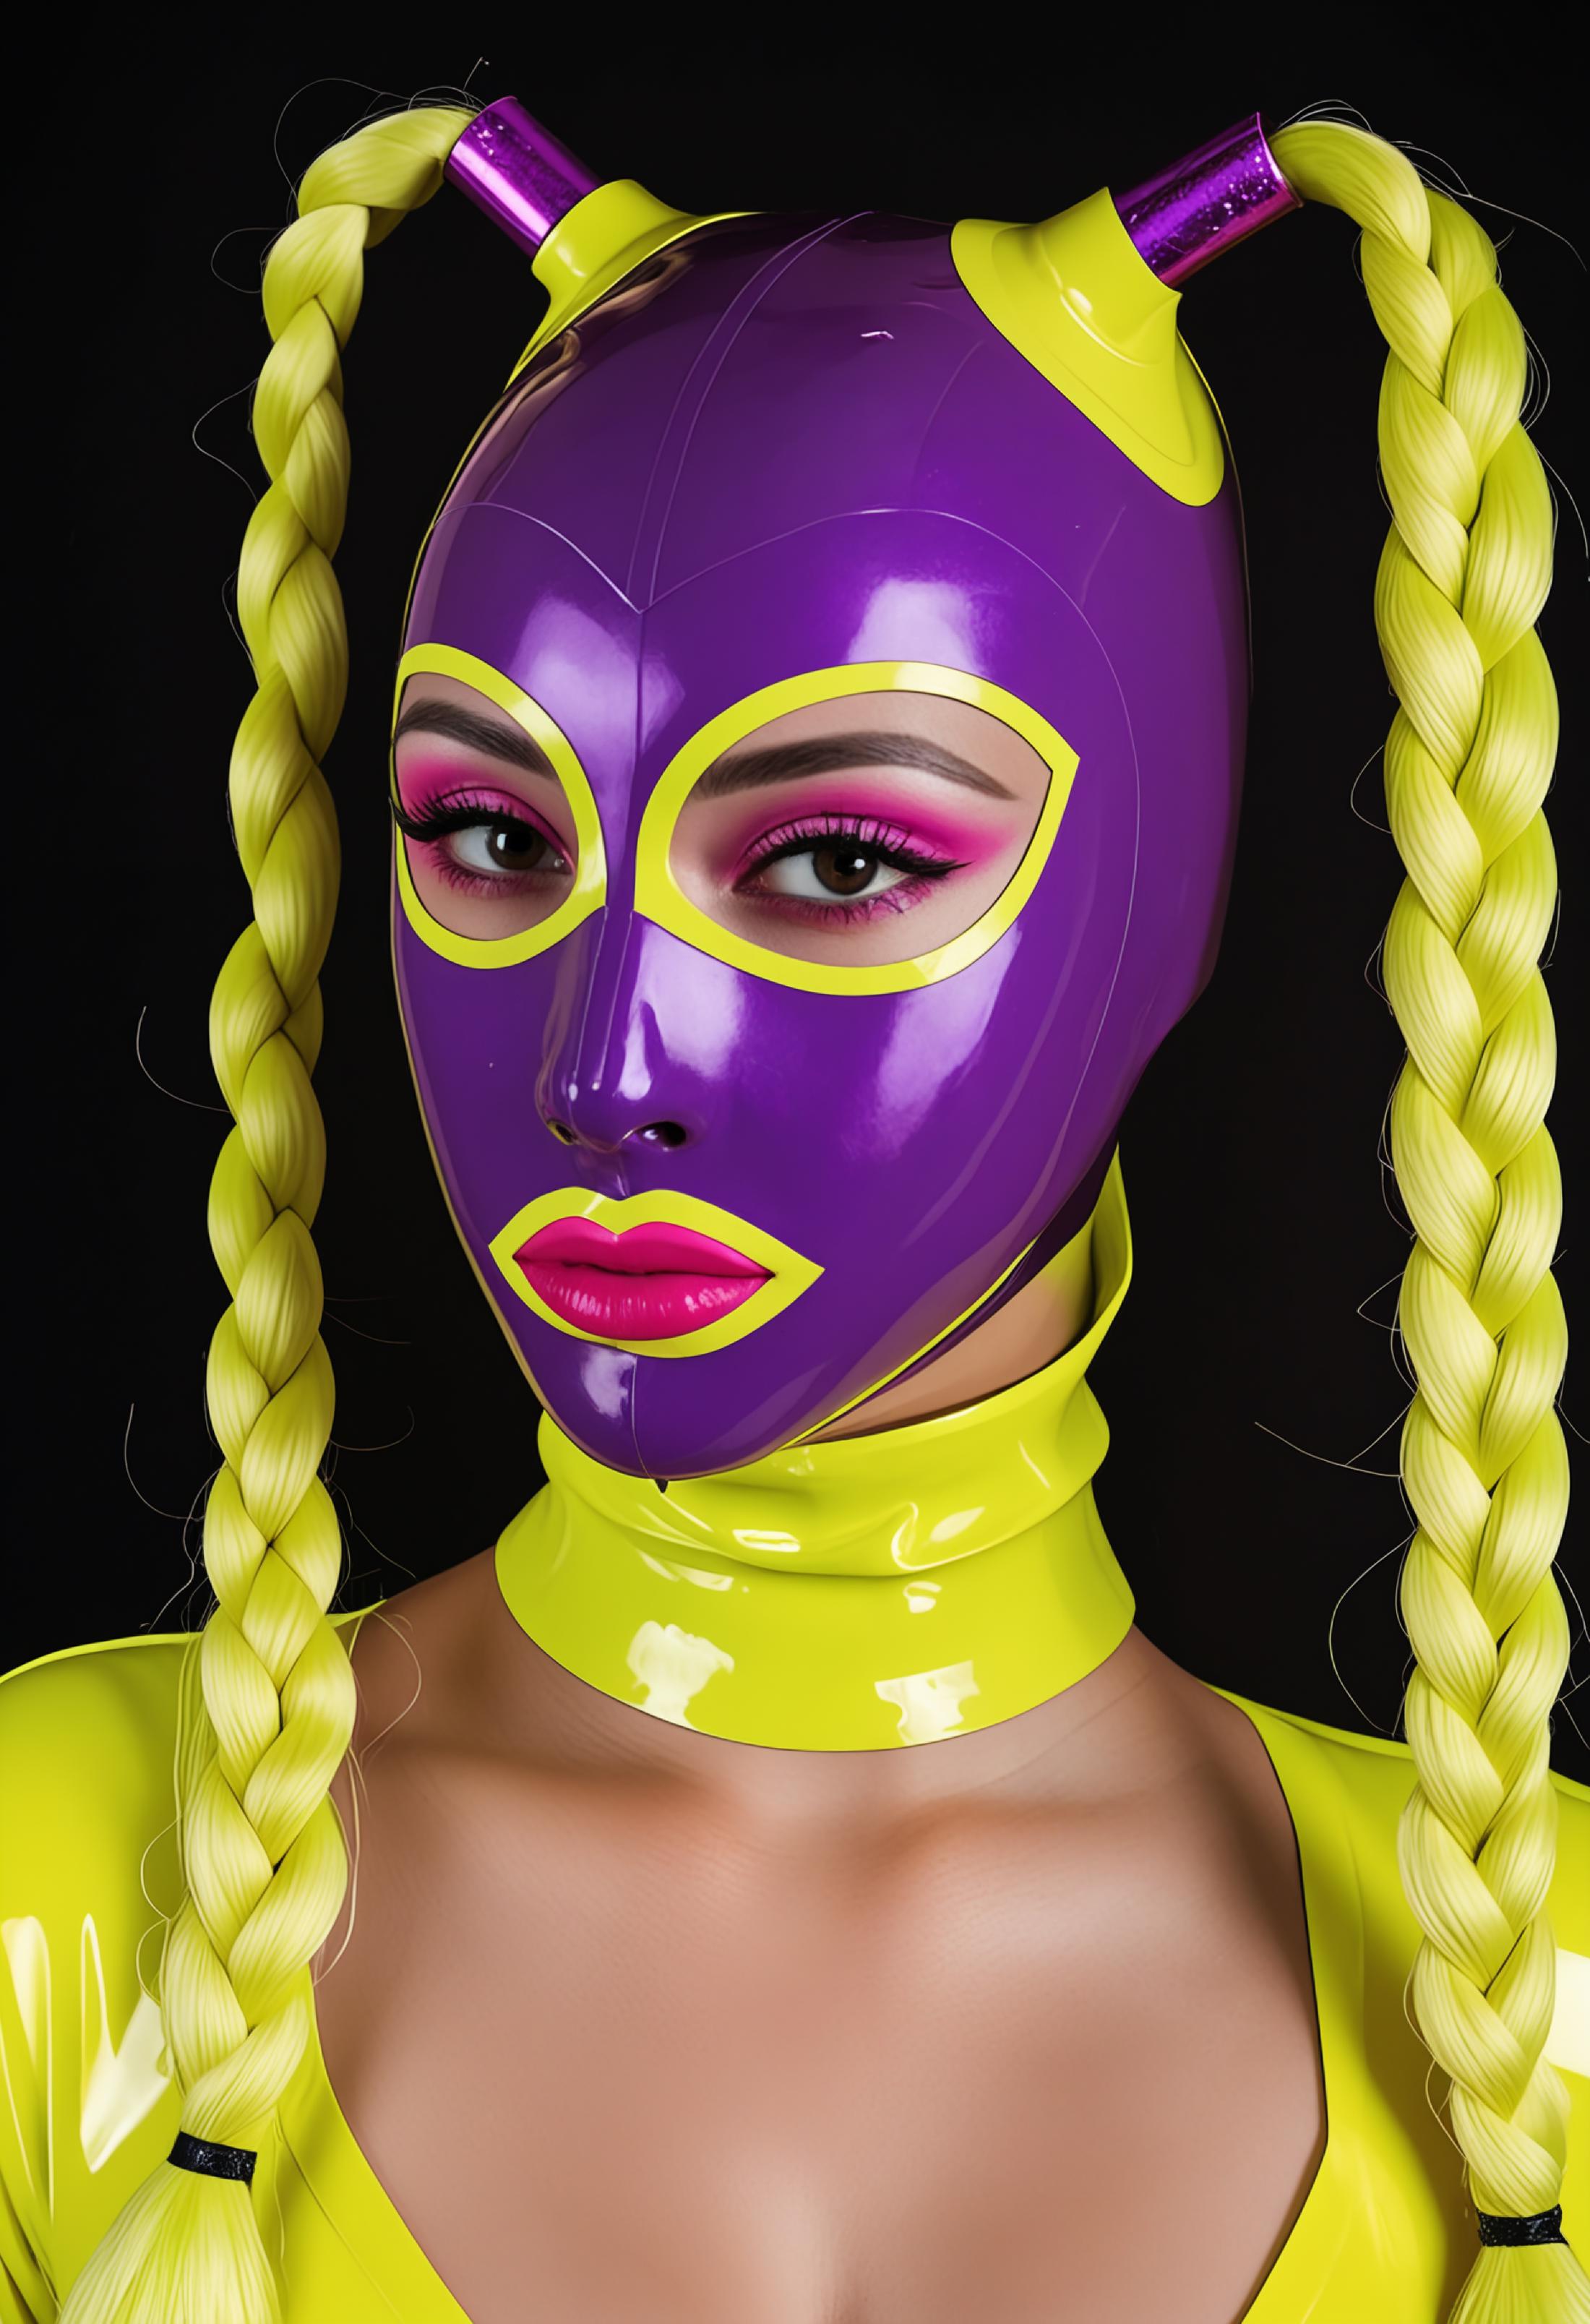 Latex Hood With Pigtails [SDXL] image by denrakeiw